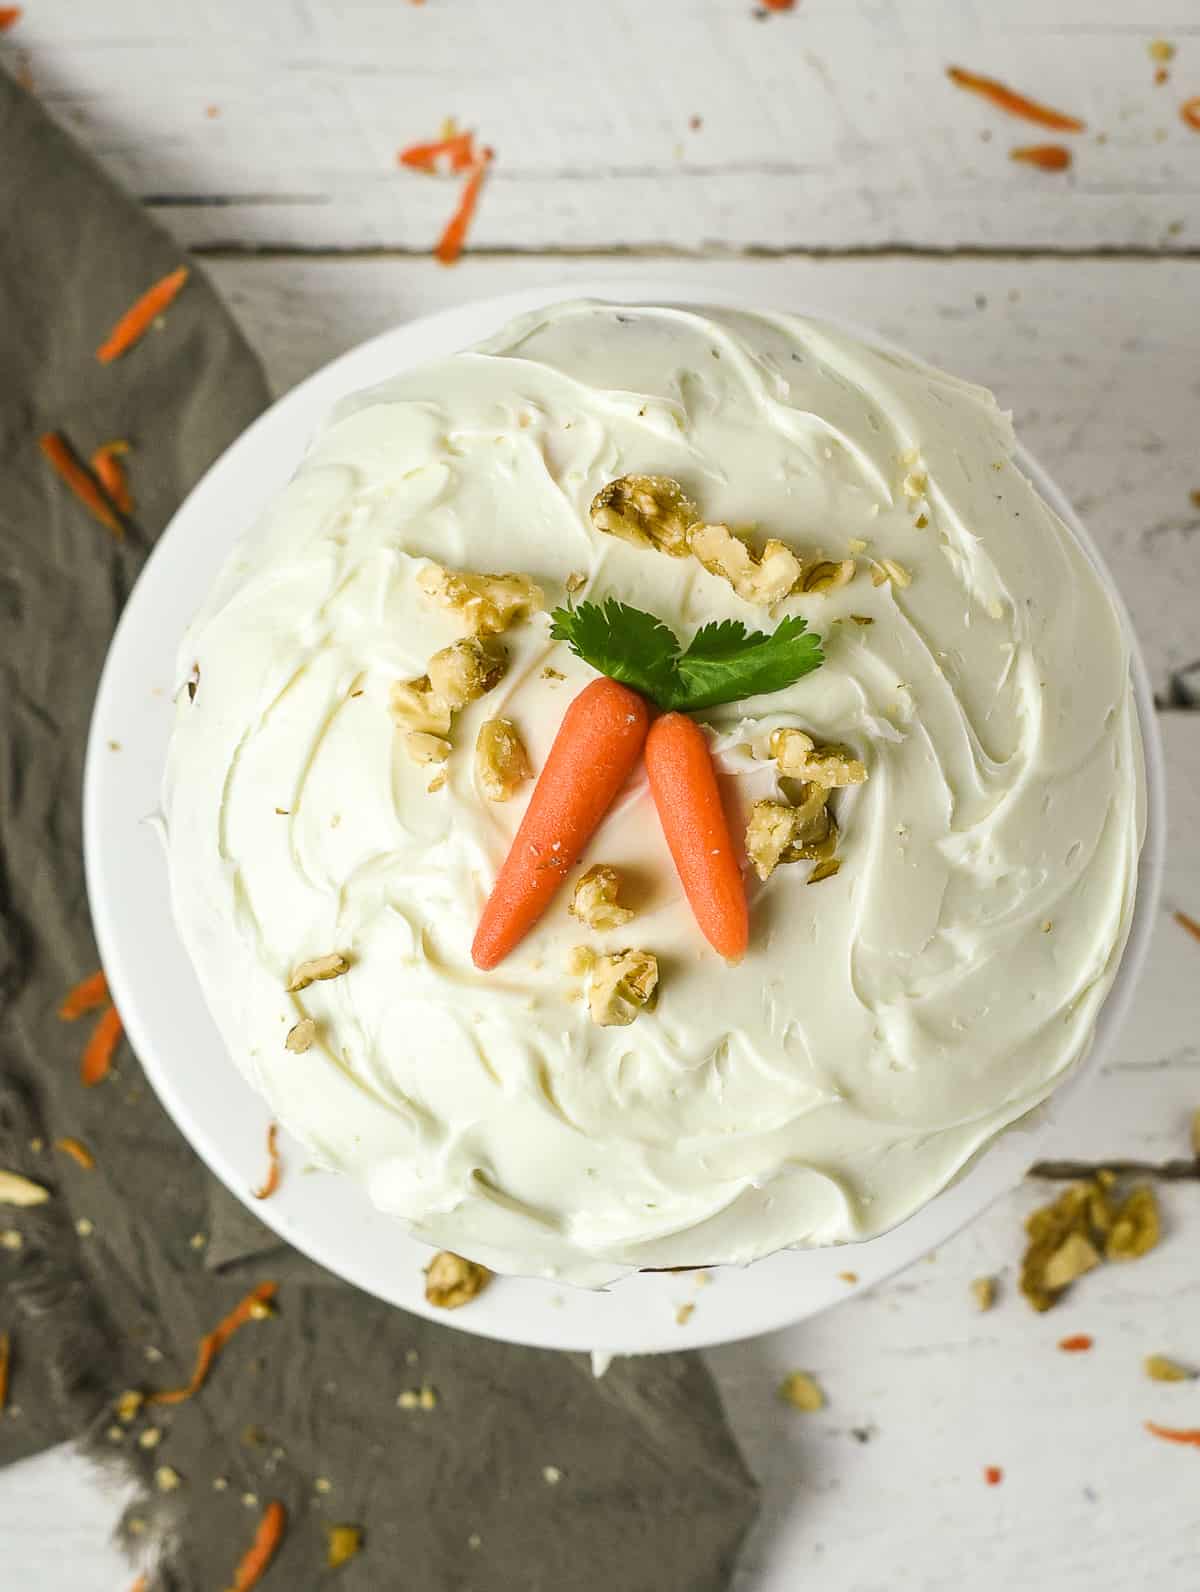 vegan carrot cake with small carrots on top.